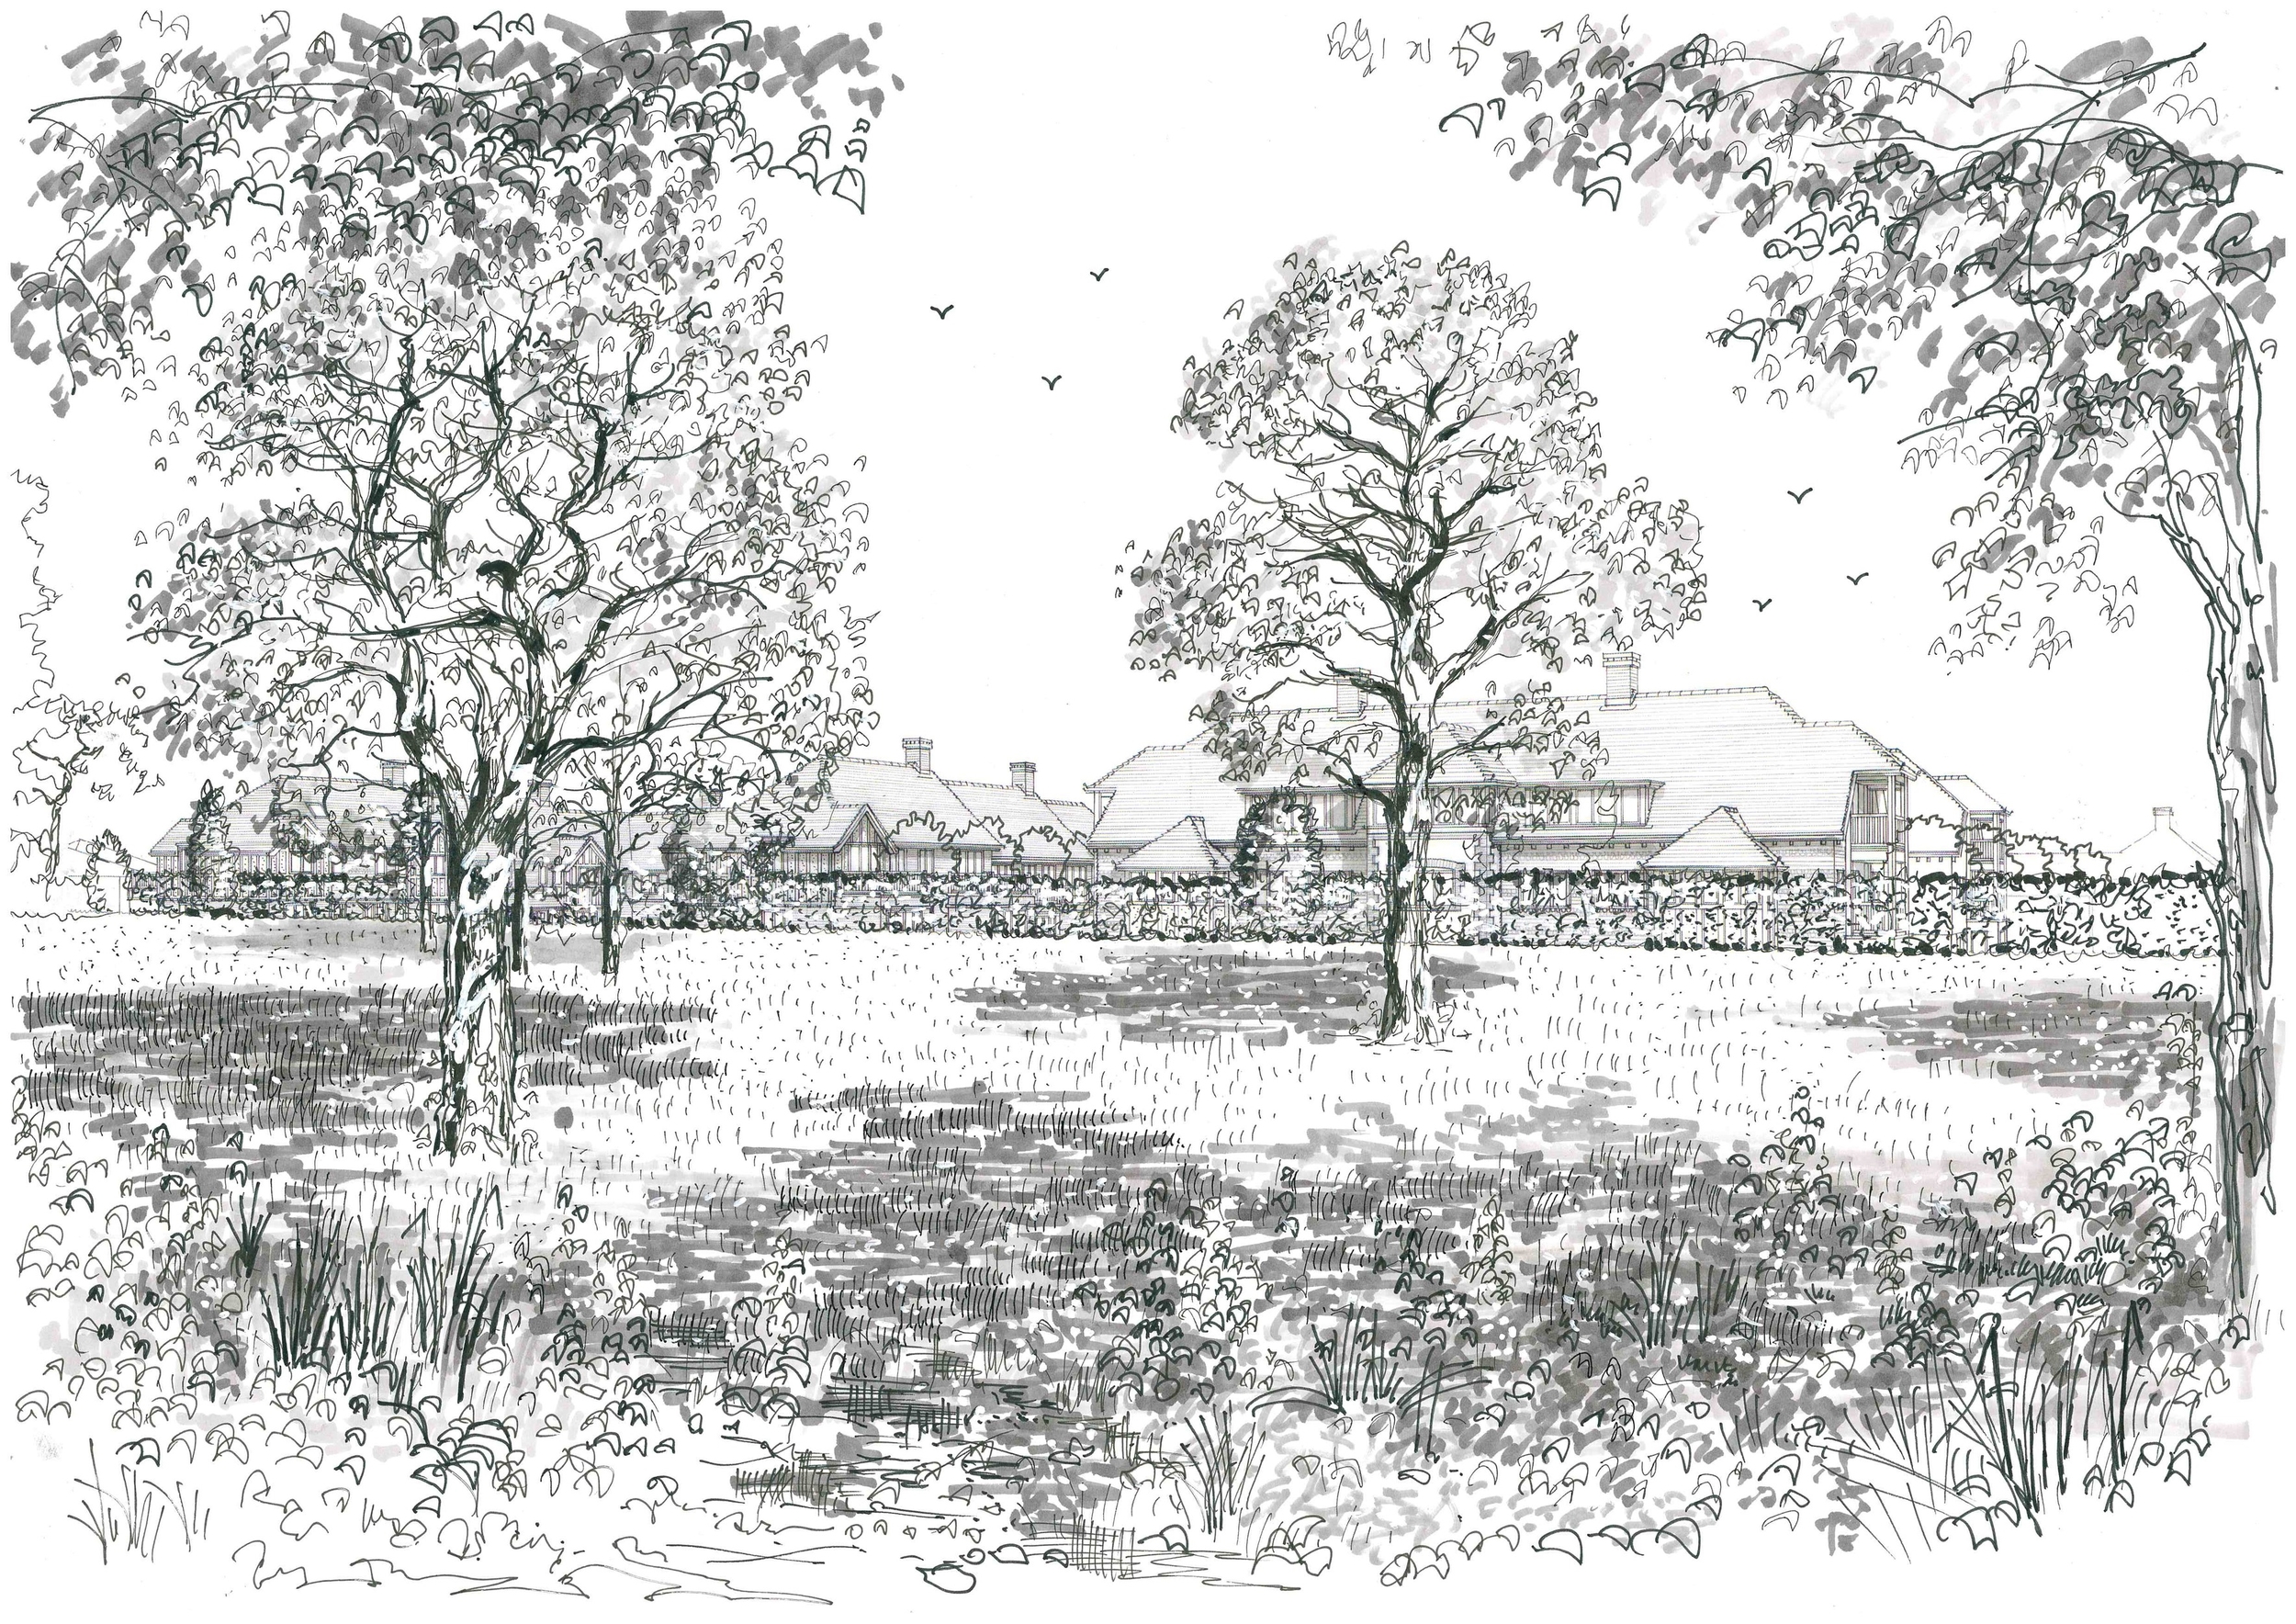 Perspective BlksBCD from green belt_with trees_20150821.jpg